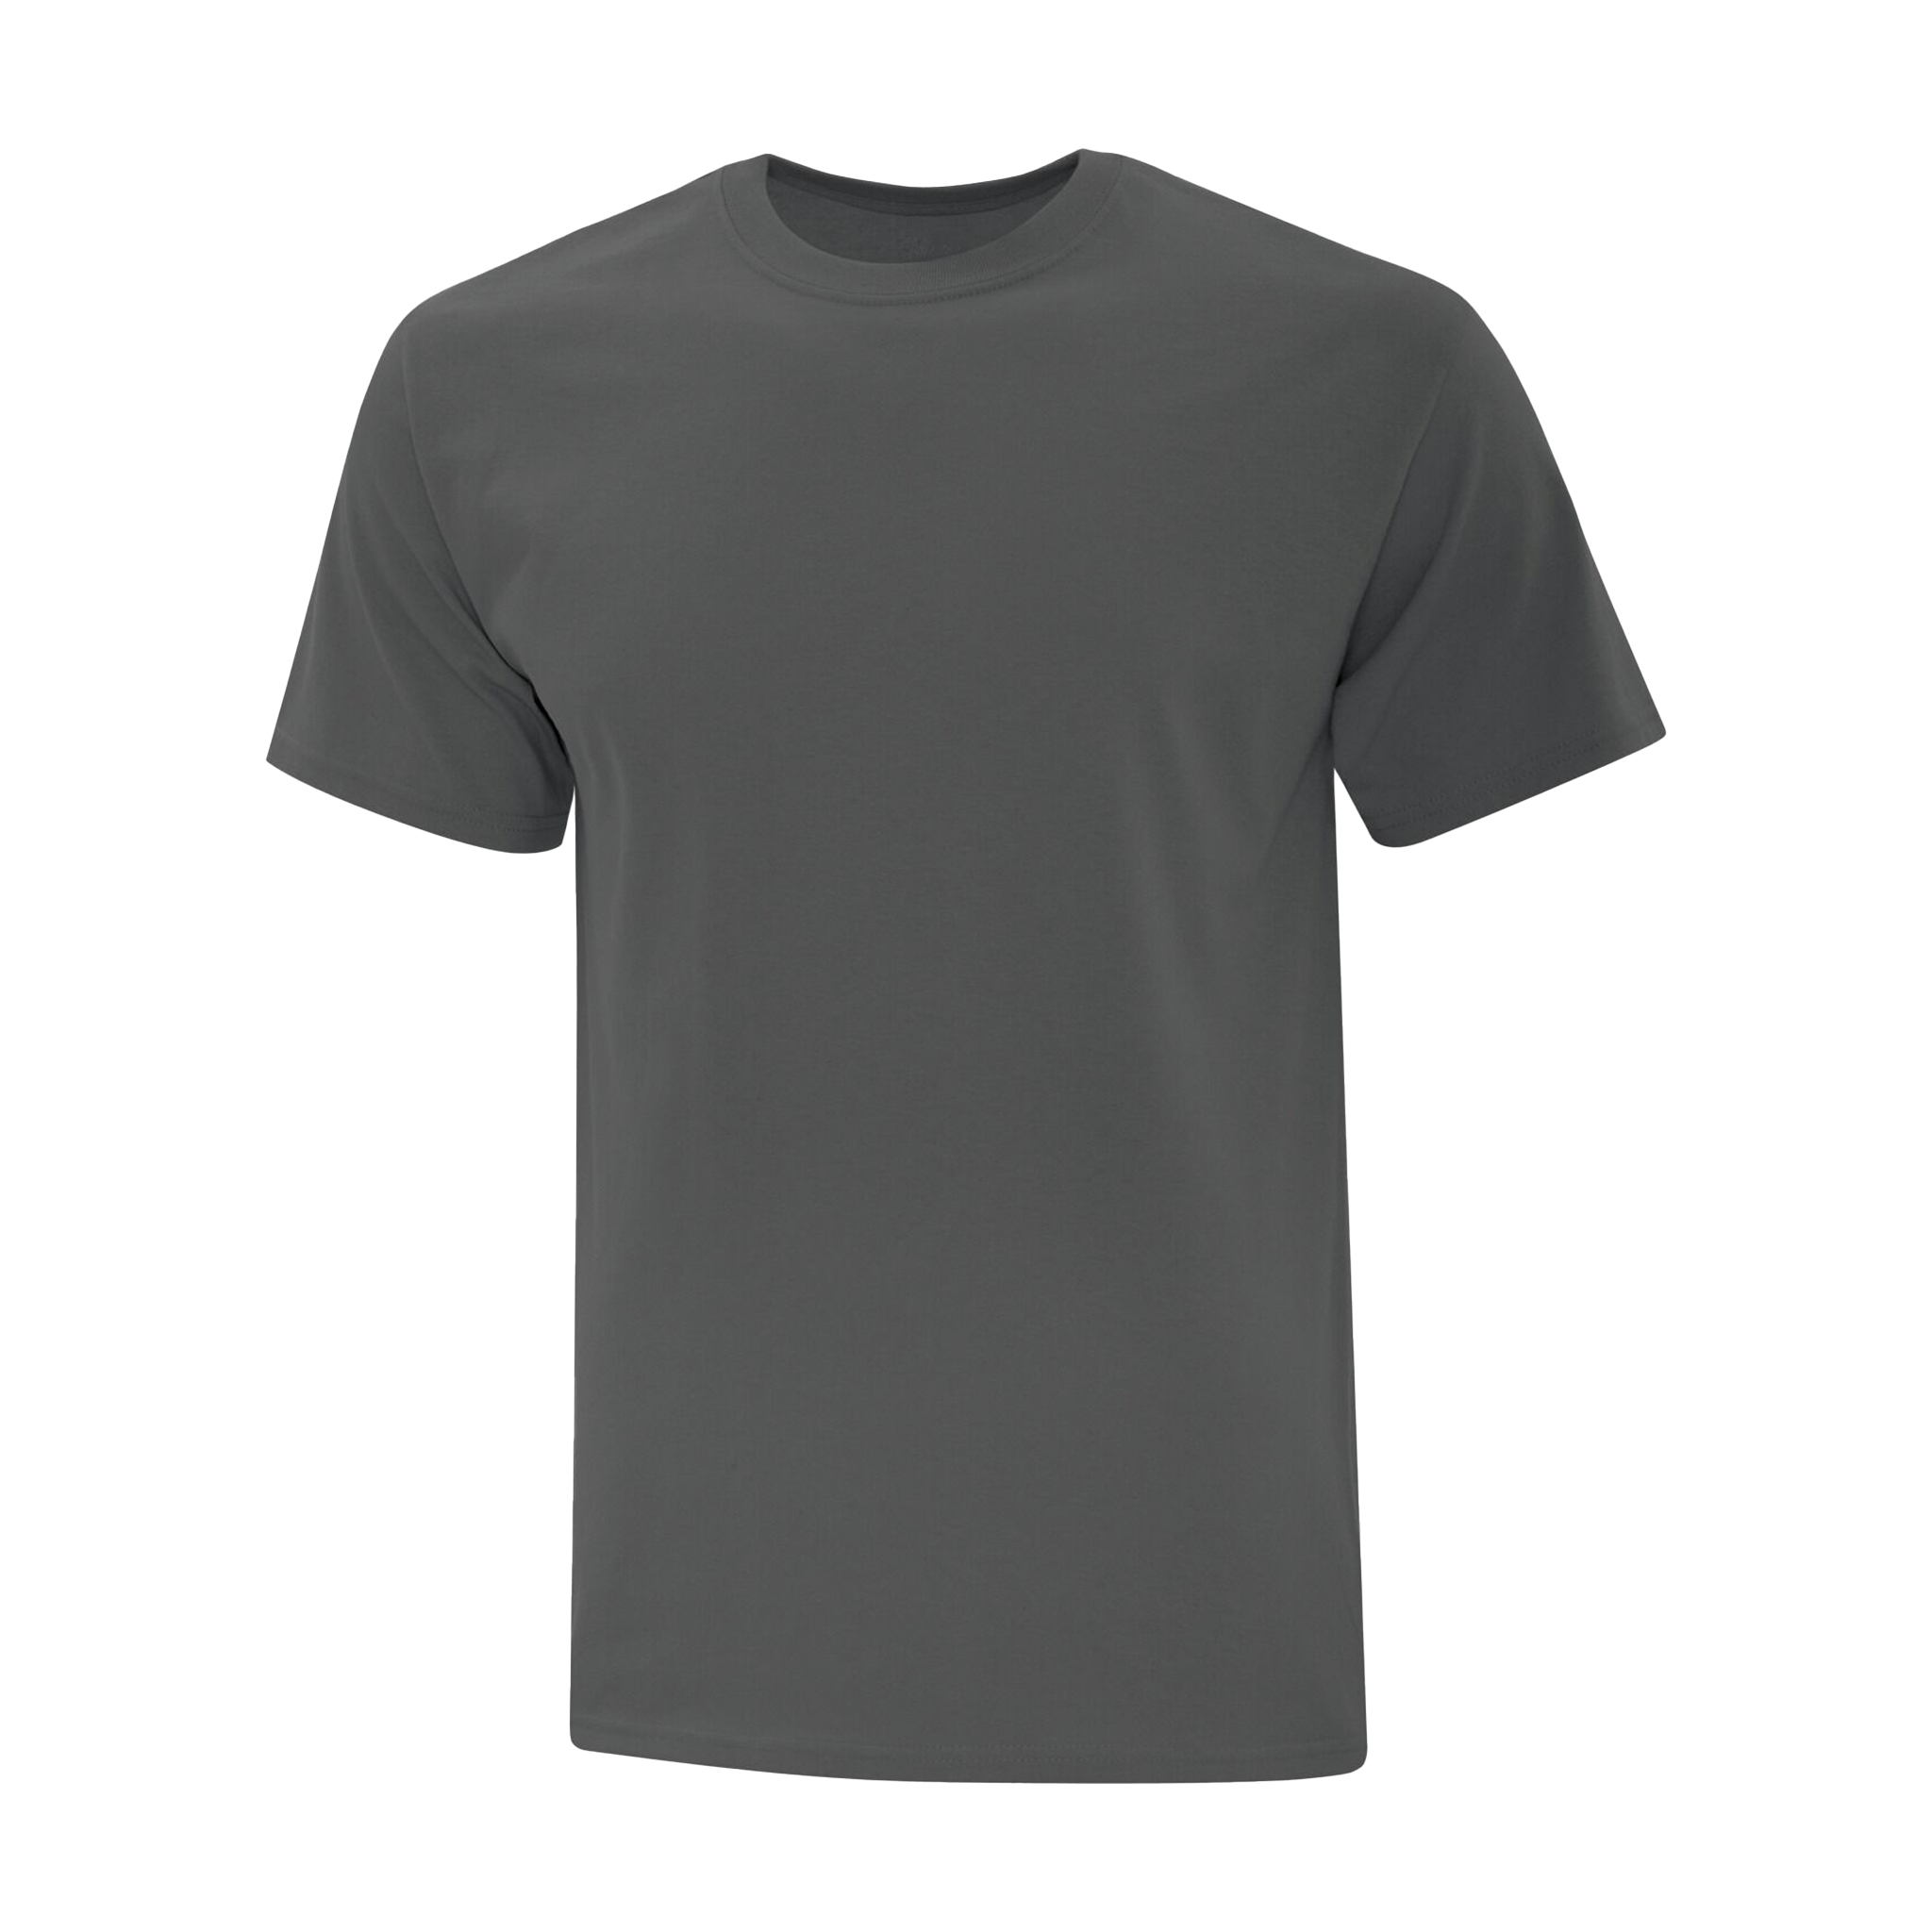 Reflections Apparel T-Shirt - Adult Unisex Sizing S-3XL - Charcoal